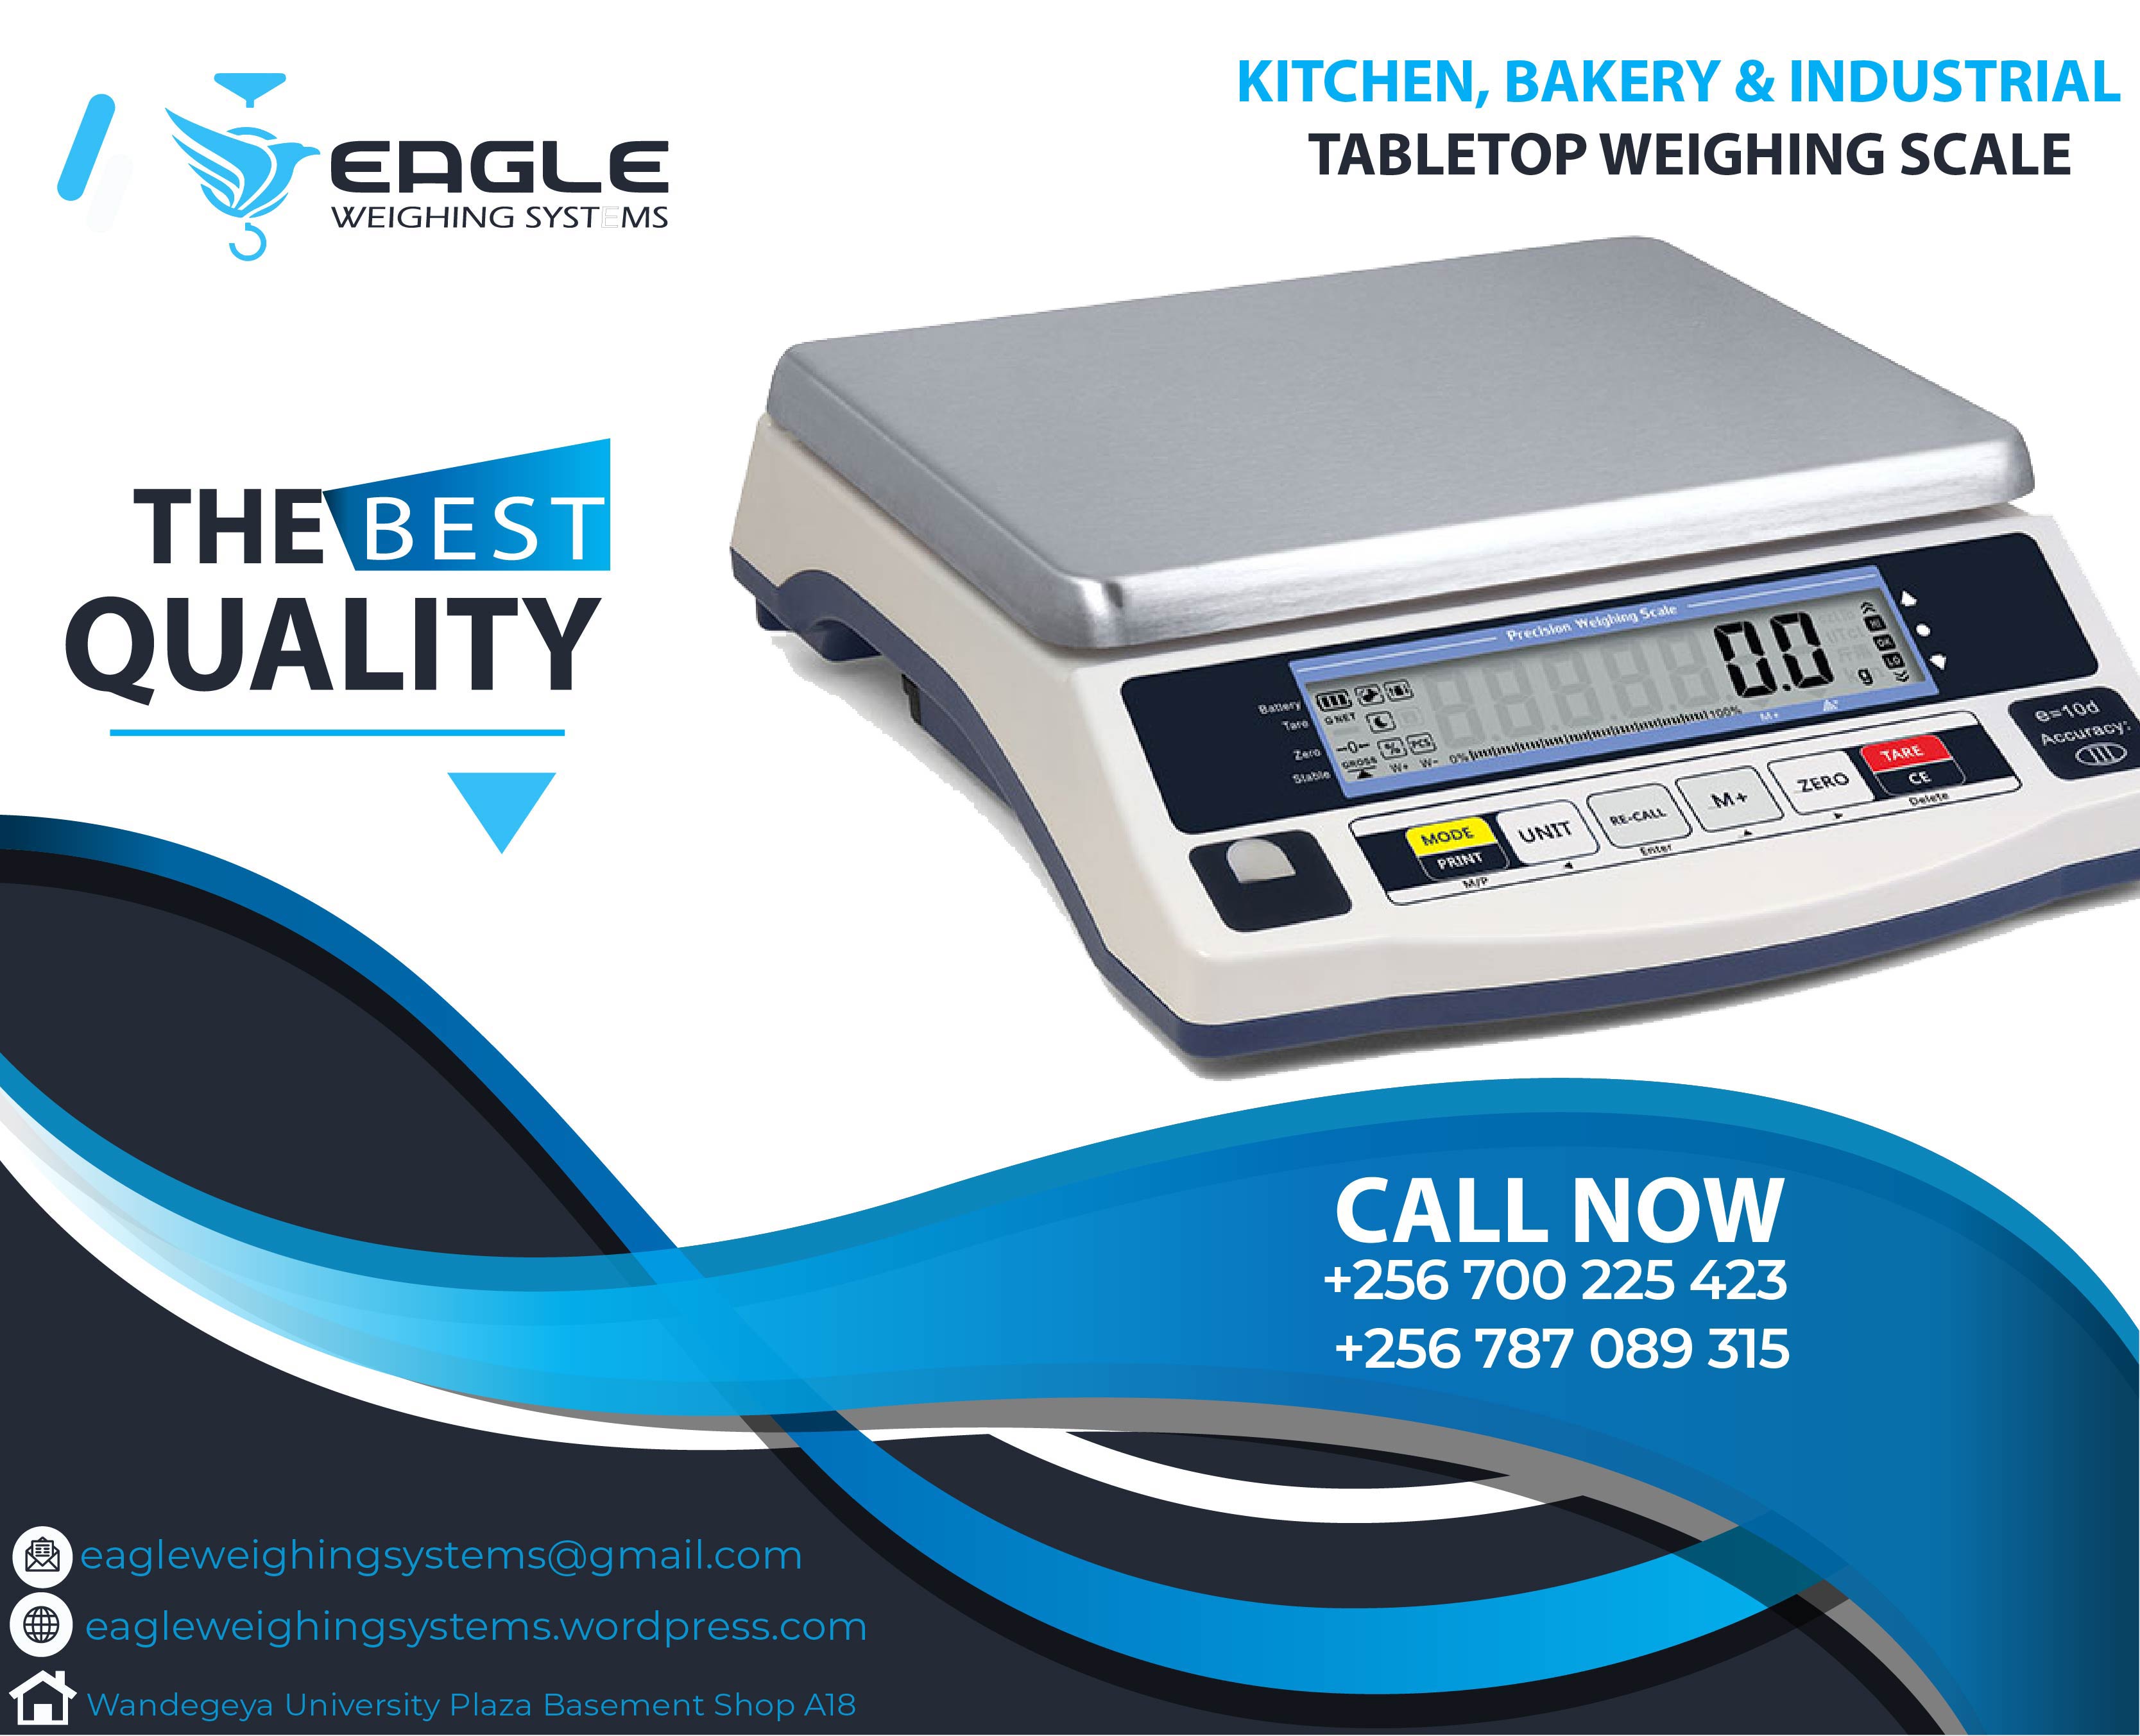 Certified Tabletop Weighing Scales.